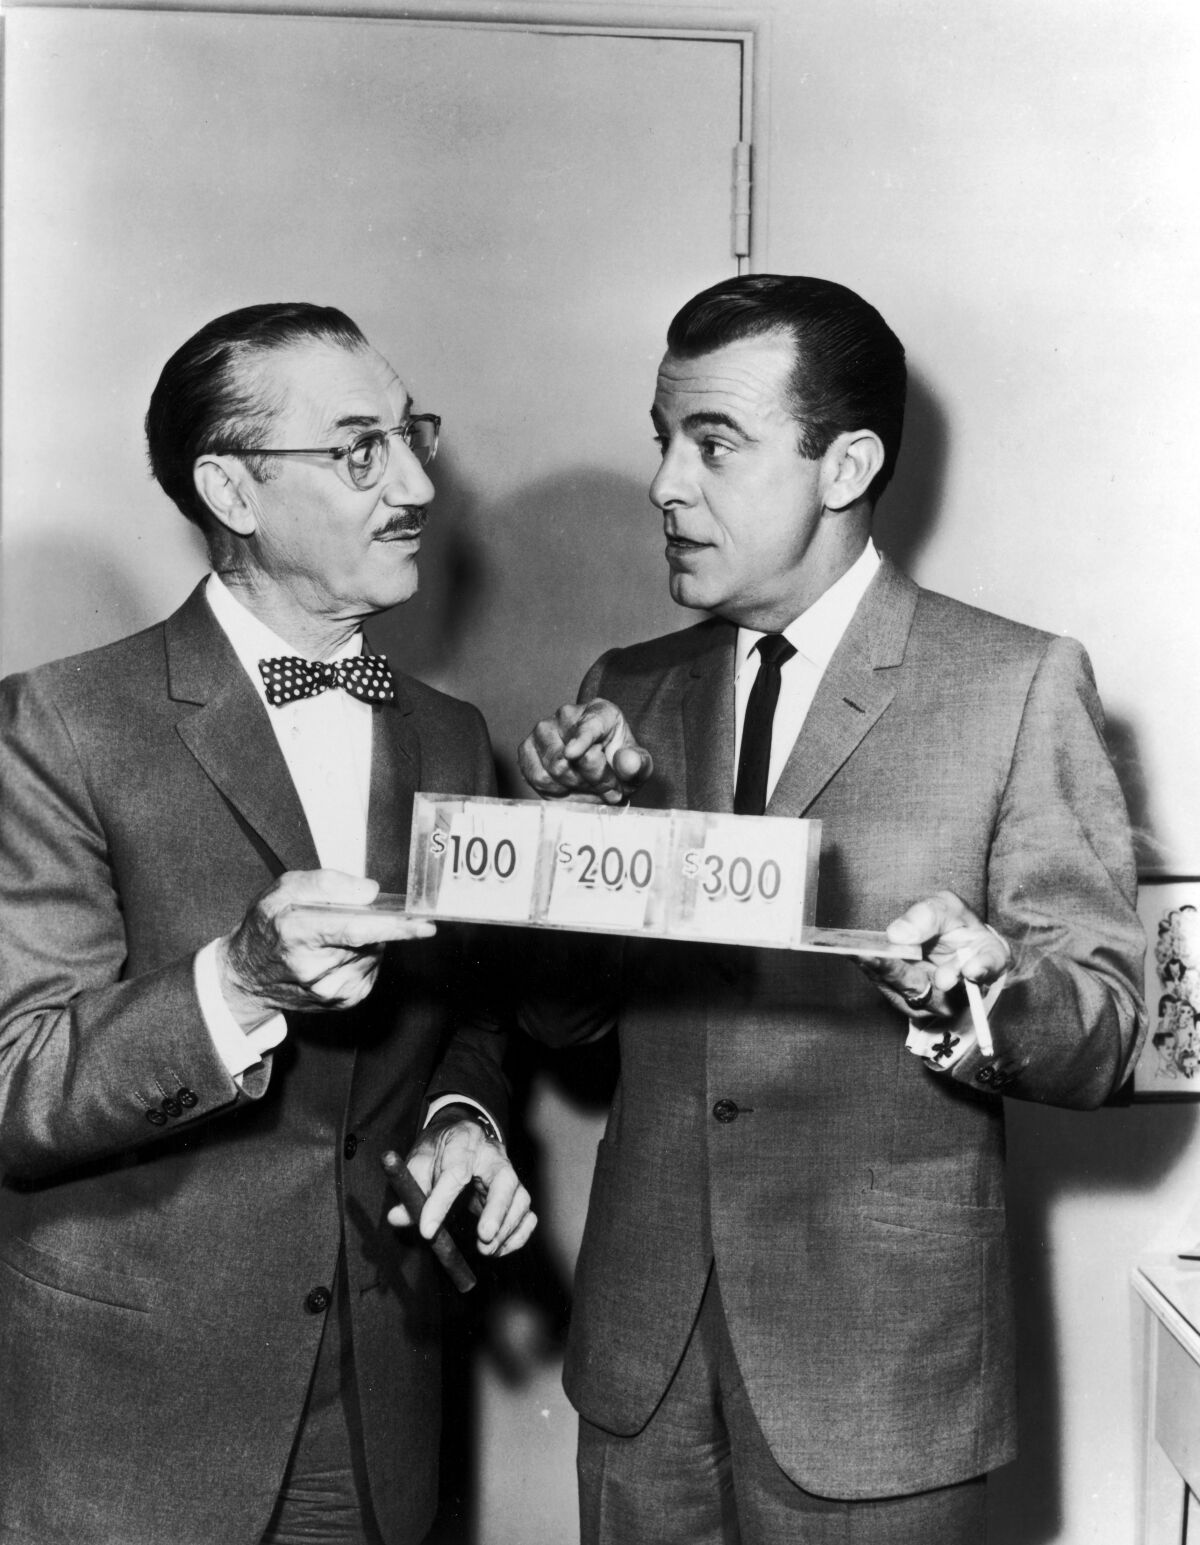 American comedian Groucho Marx with his co-host on the radio and television quiz show 'You Bet Your Life', George Fenneman